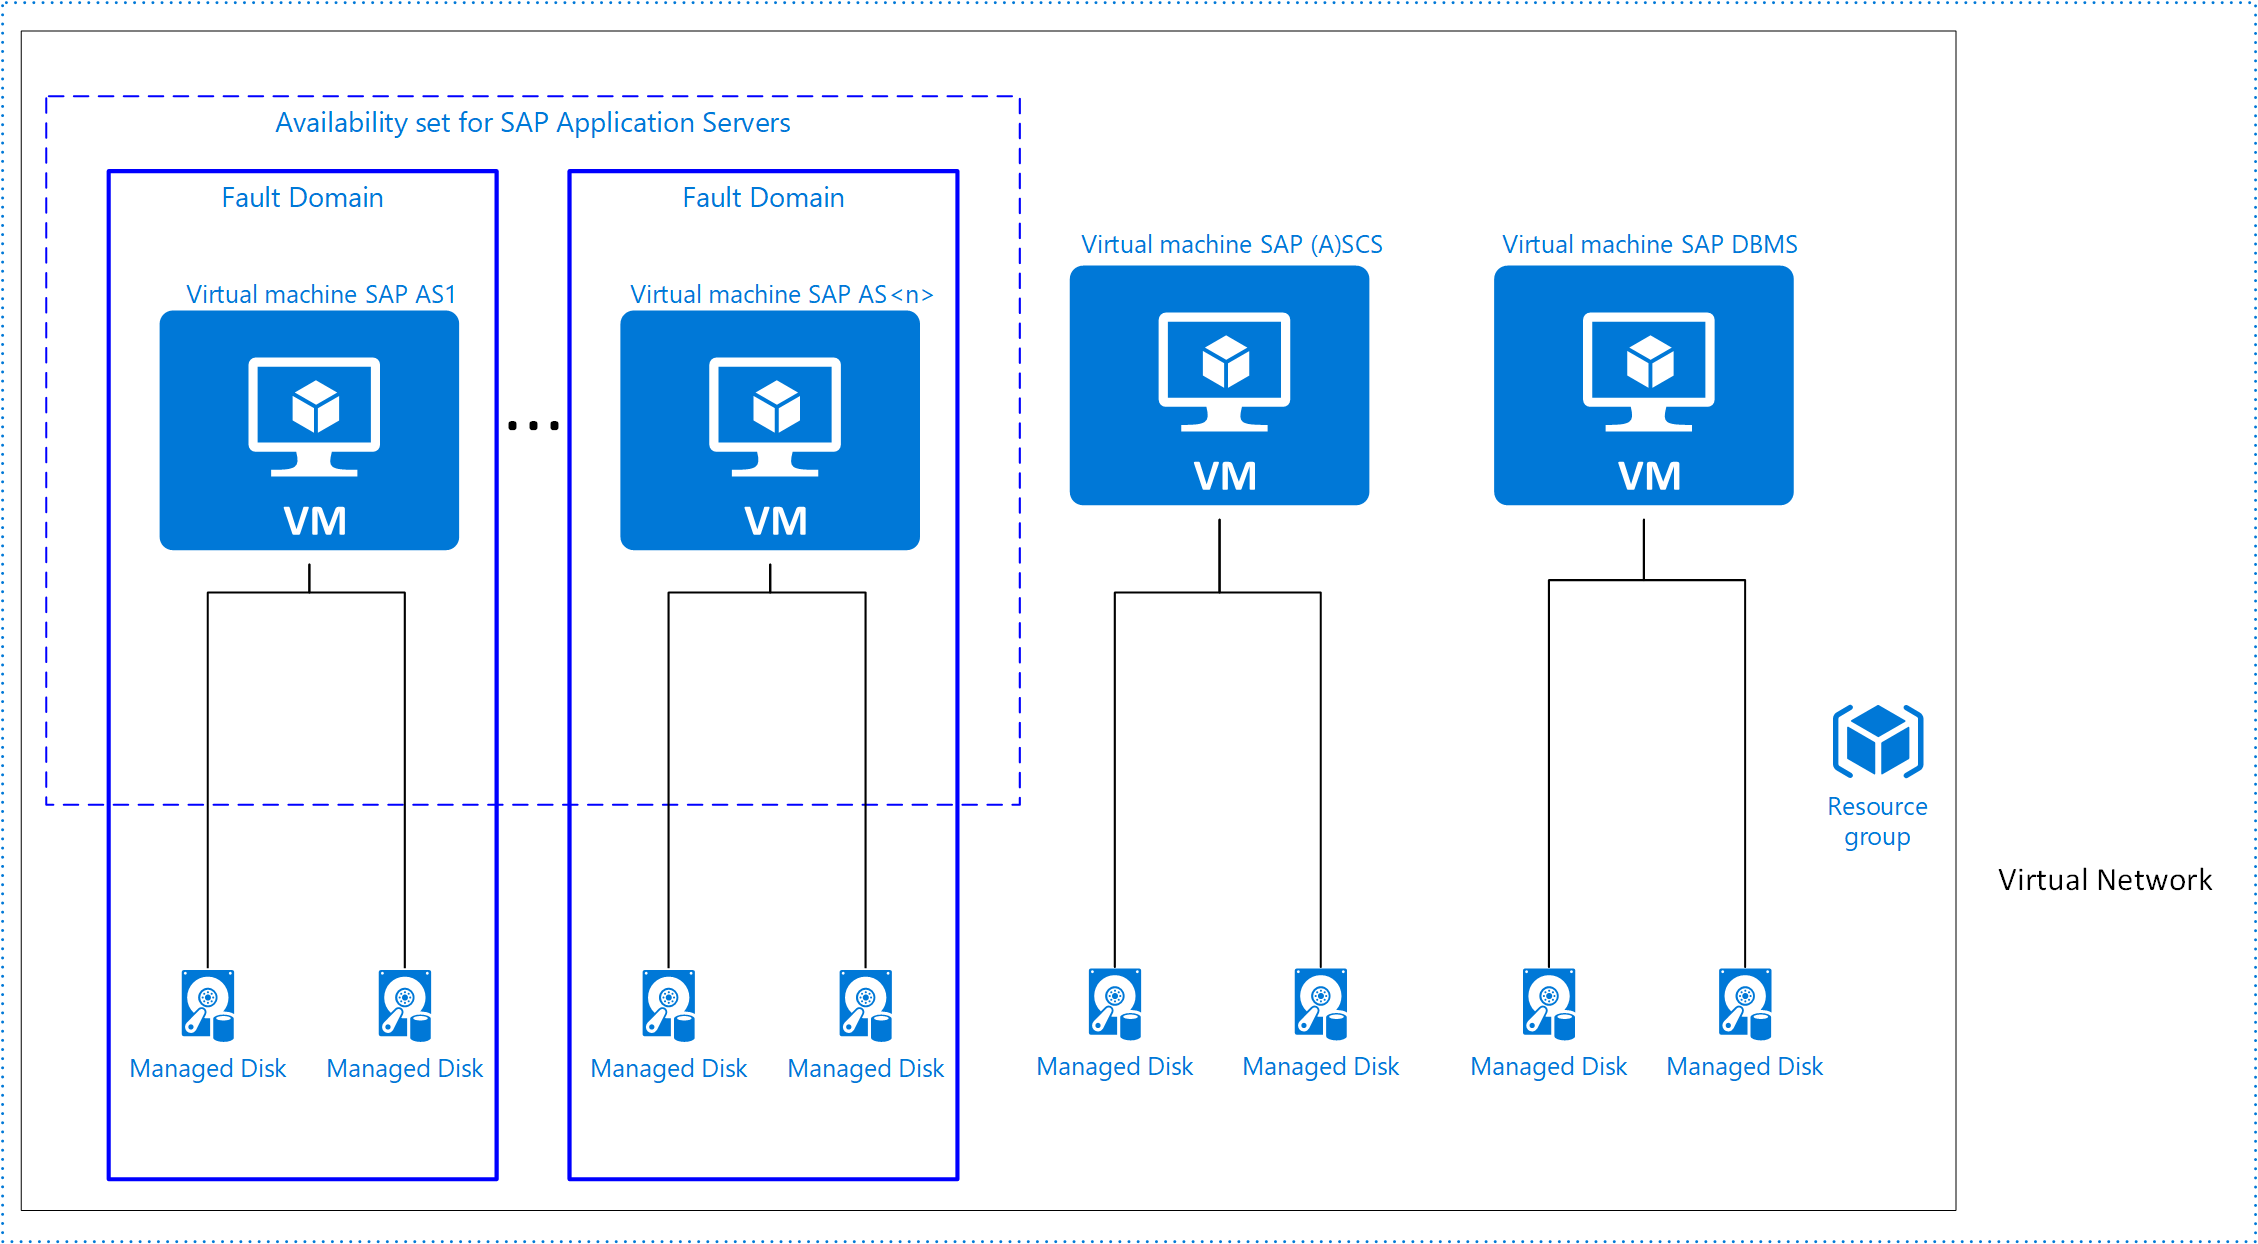 Utilizing Azure infrastructure HA to achieve SAP application higher availability